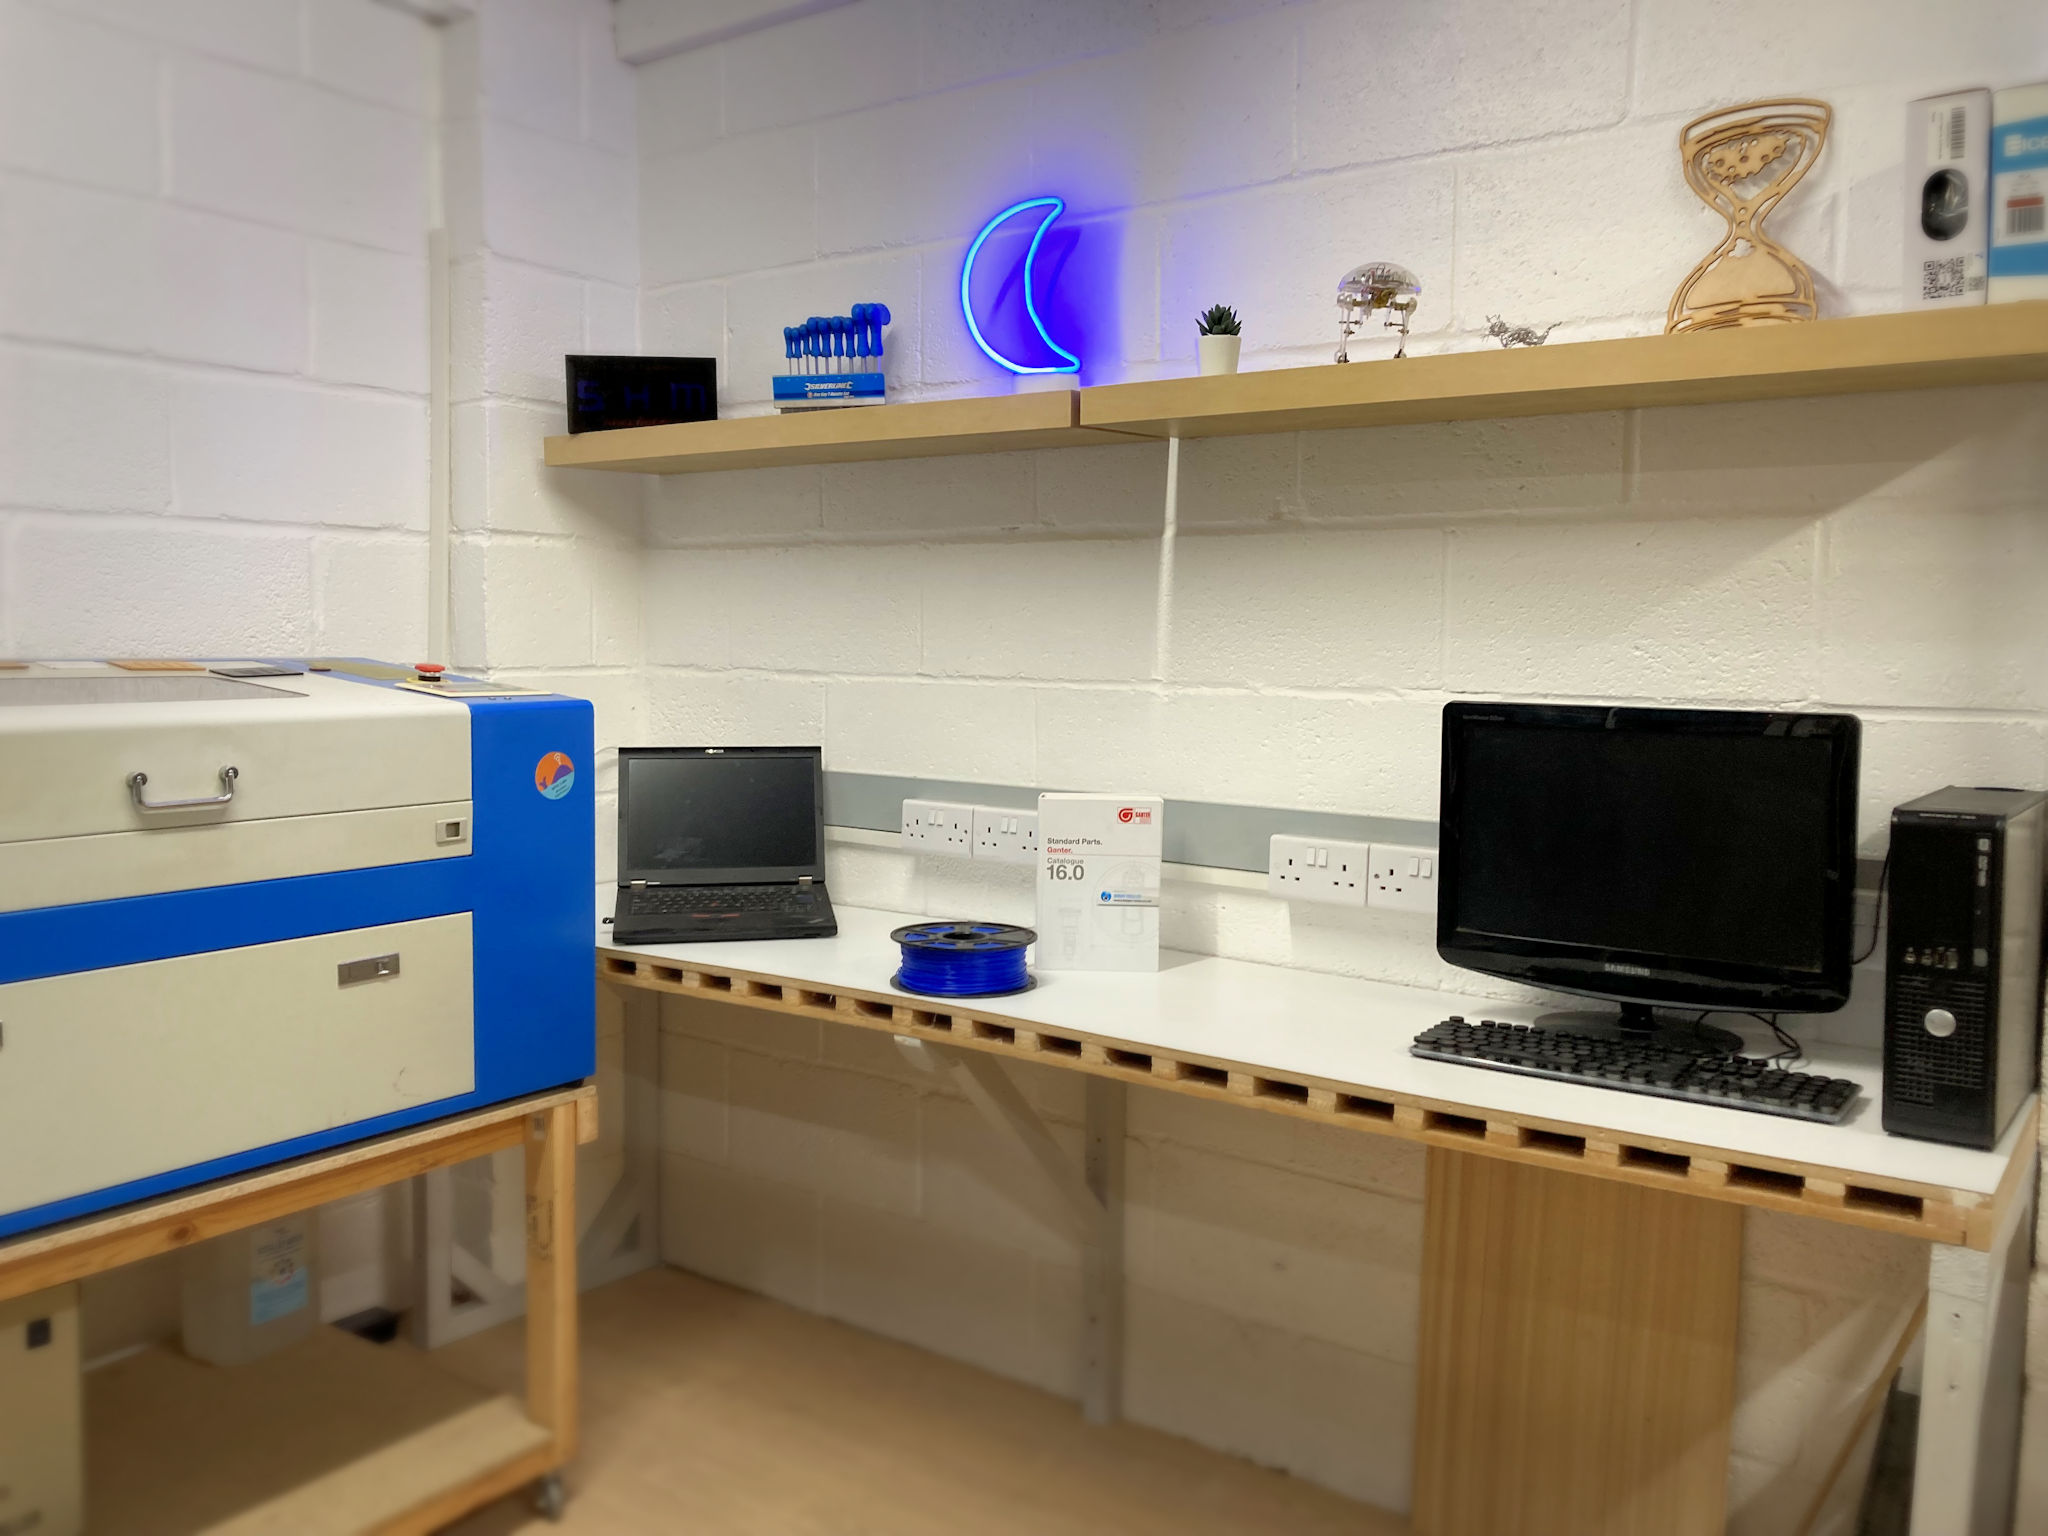 The Laser Cutter area of the Makerspace